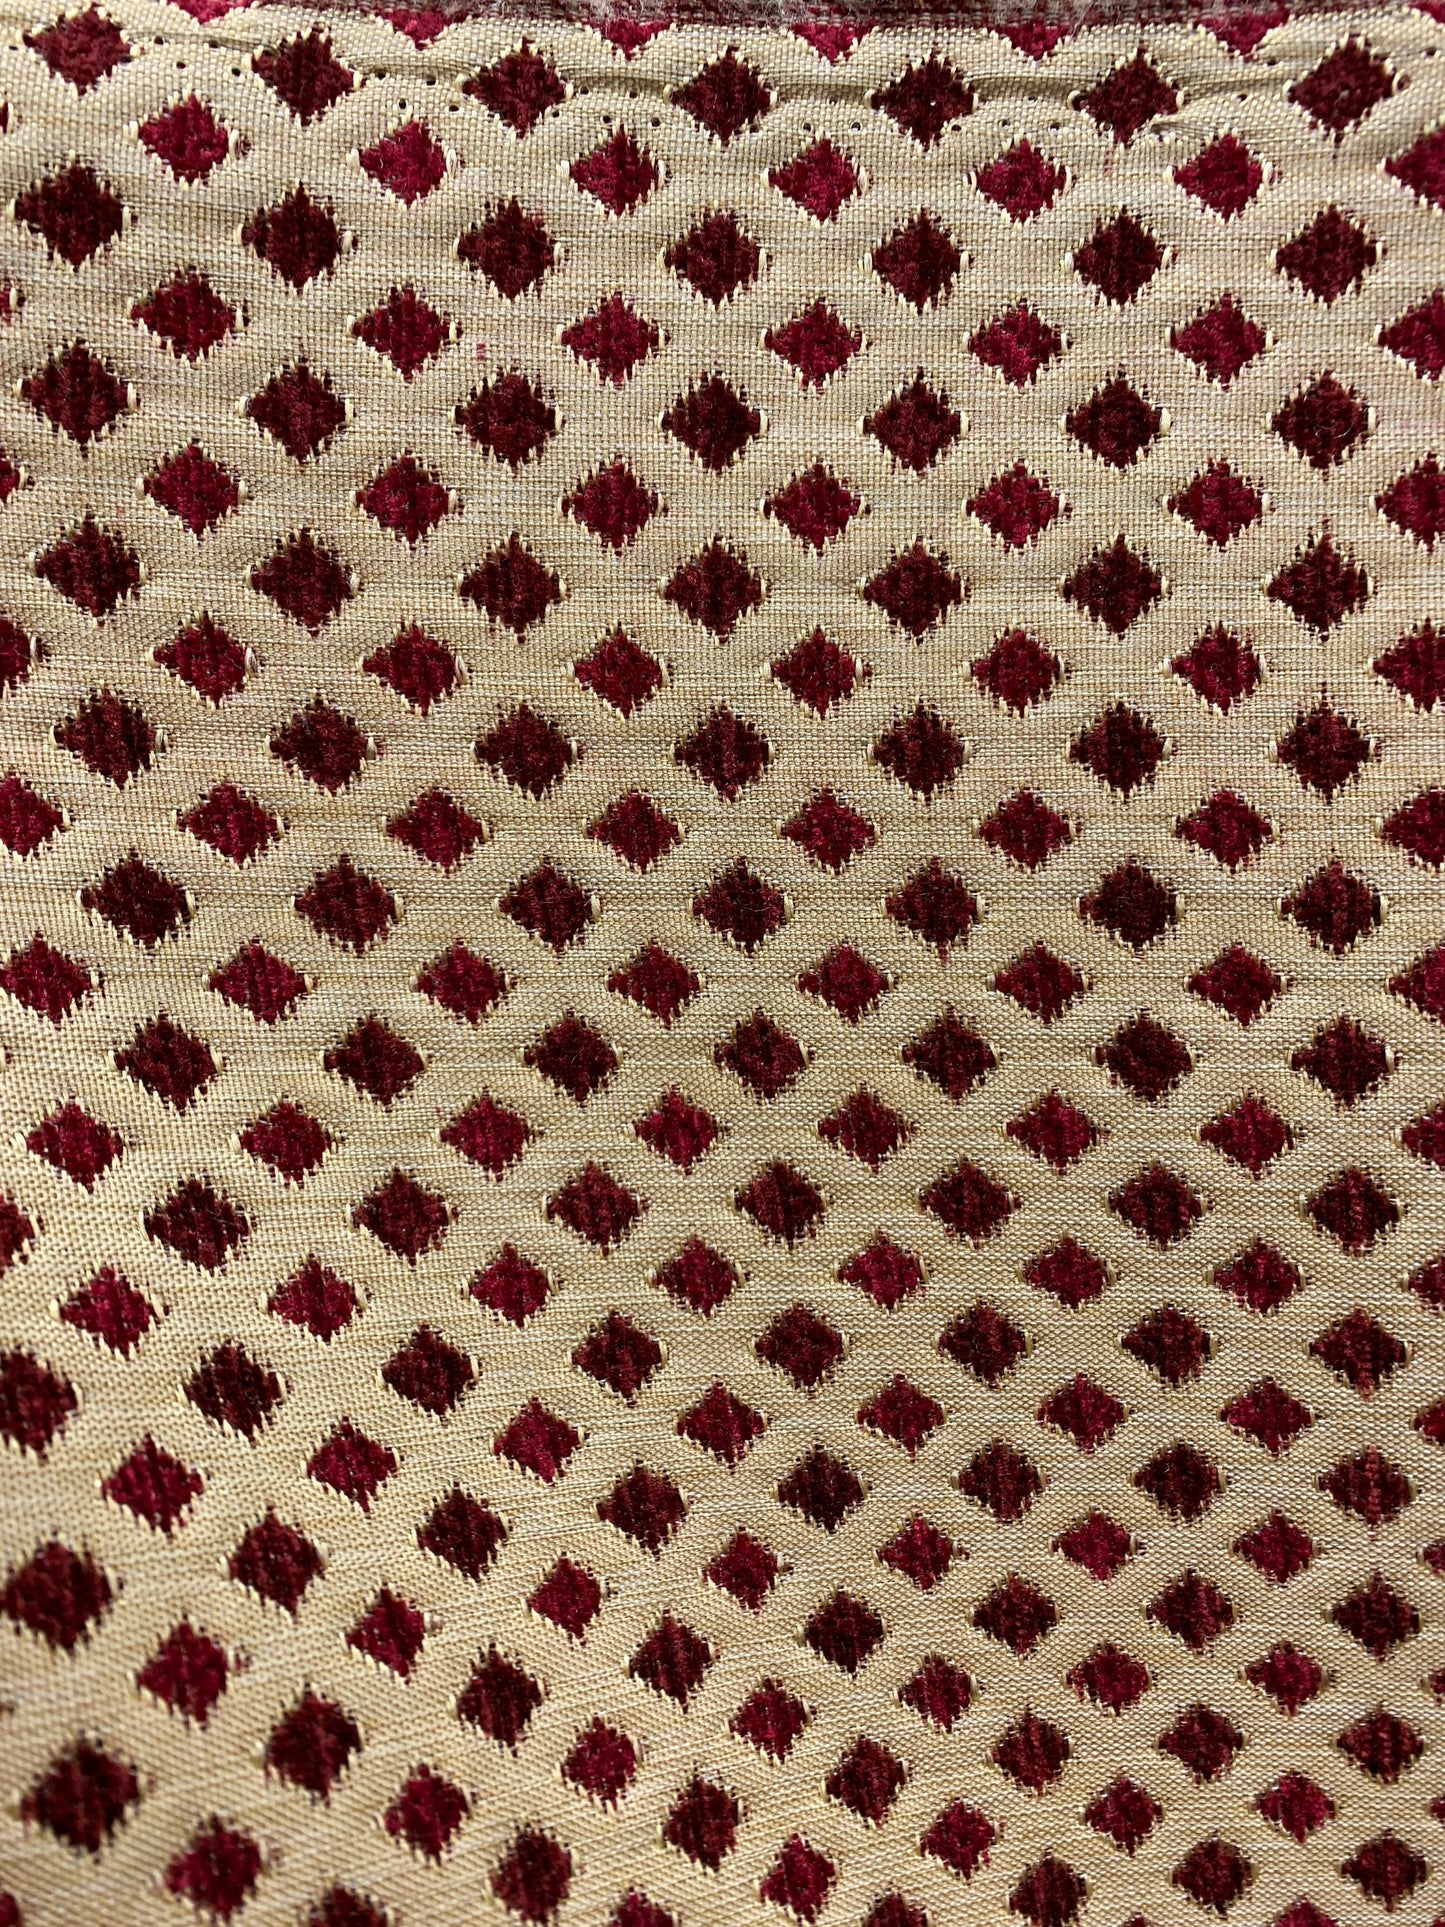 BURGUNDY BEIGE Diamond Chenille Upholstery Brocade Fabric (56 in.) Sold By The Yard